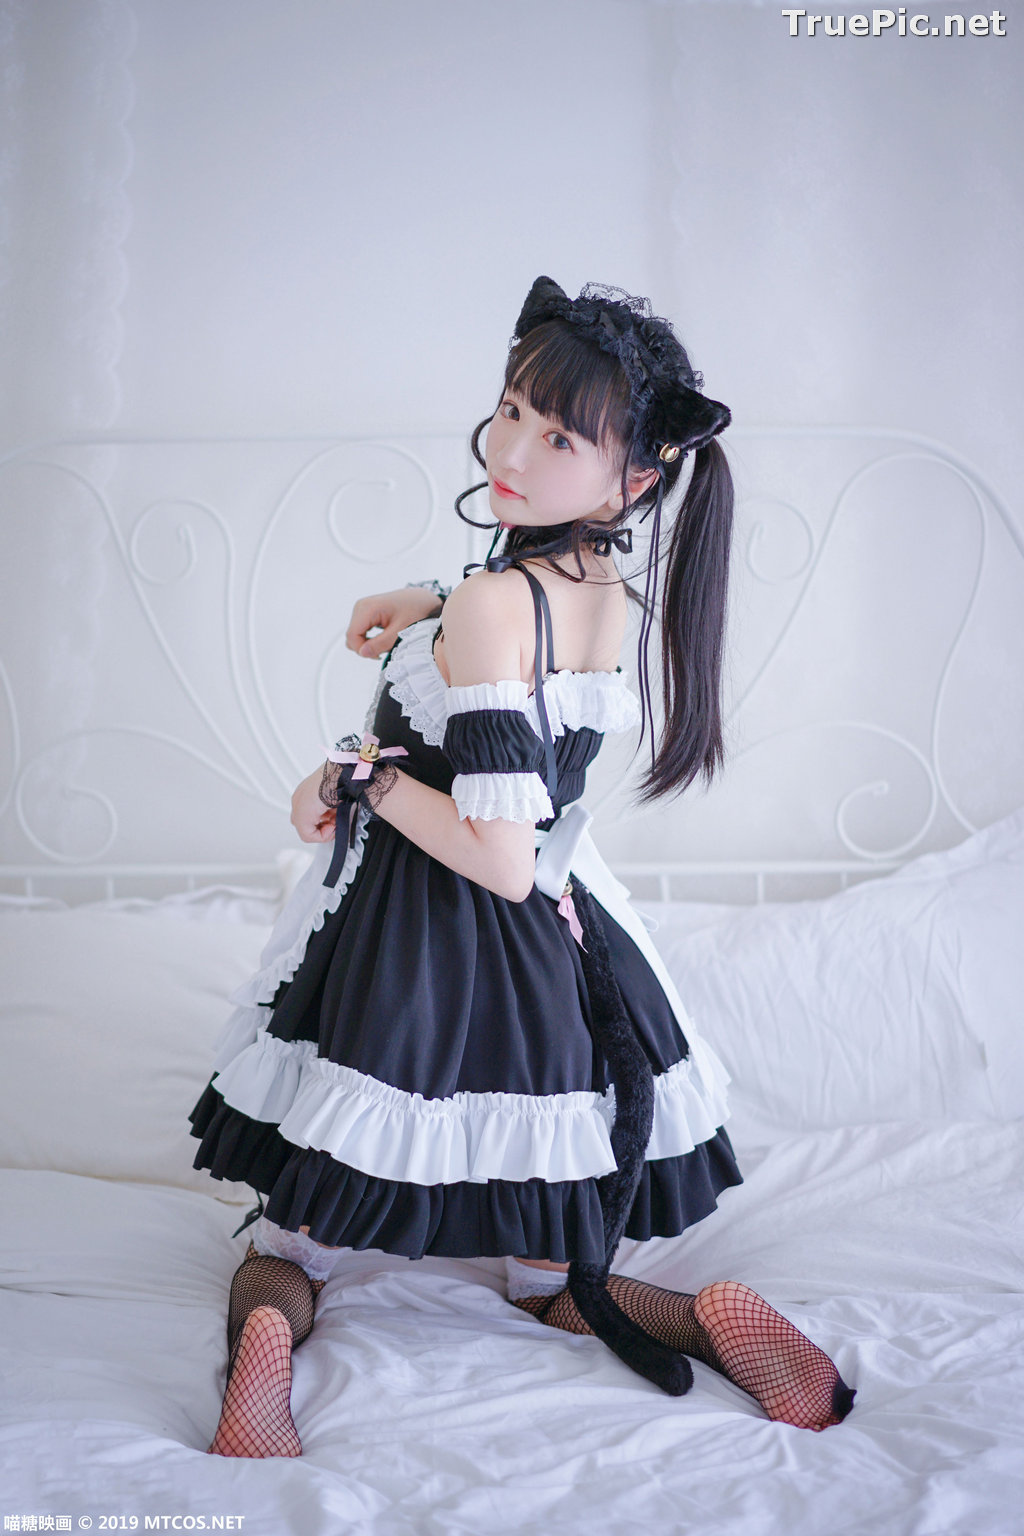 Image [MTCos] 喵糖映画 Vol.051 - Chinese Cute Model - Lovely Maid Cat - TruePic.net - Picture-20